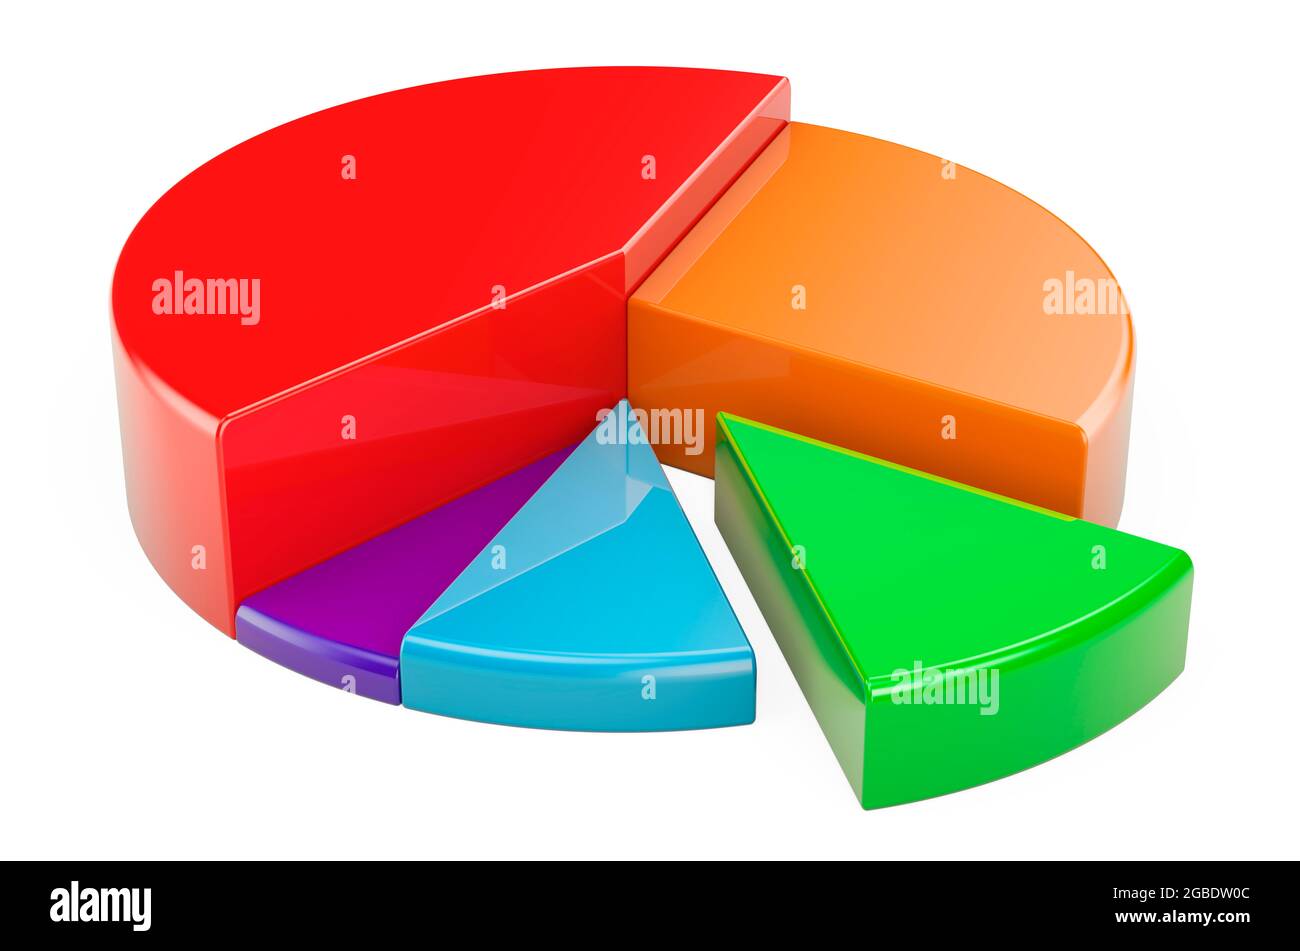 Pie Chart 3d Rendering Isolated On White Background Stock Photo Alamy